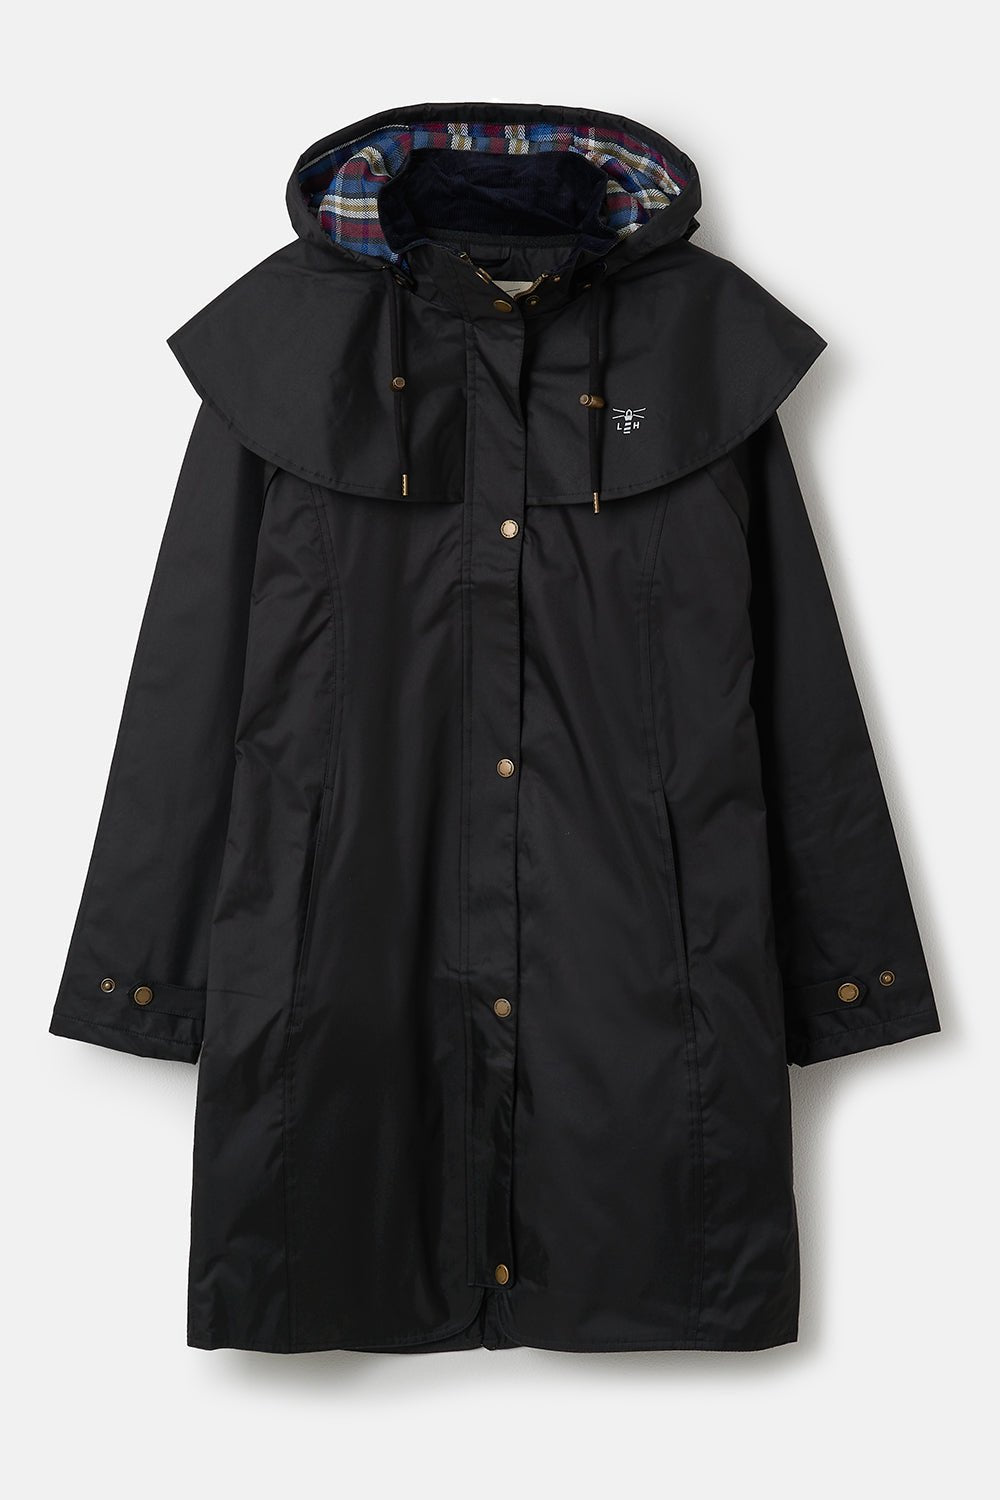 Outrider 3/4 Length Waterproof Raincoat - Black-Lighthouse